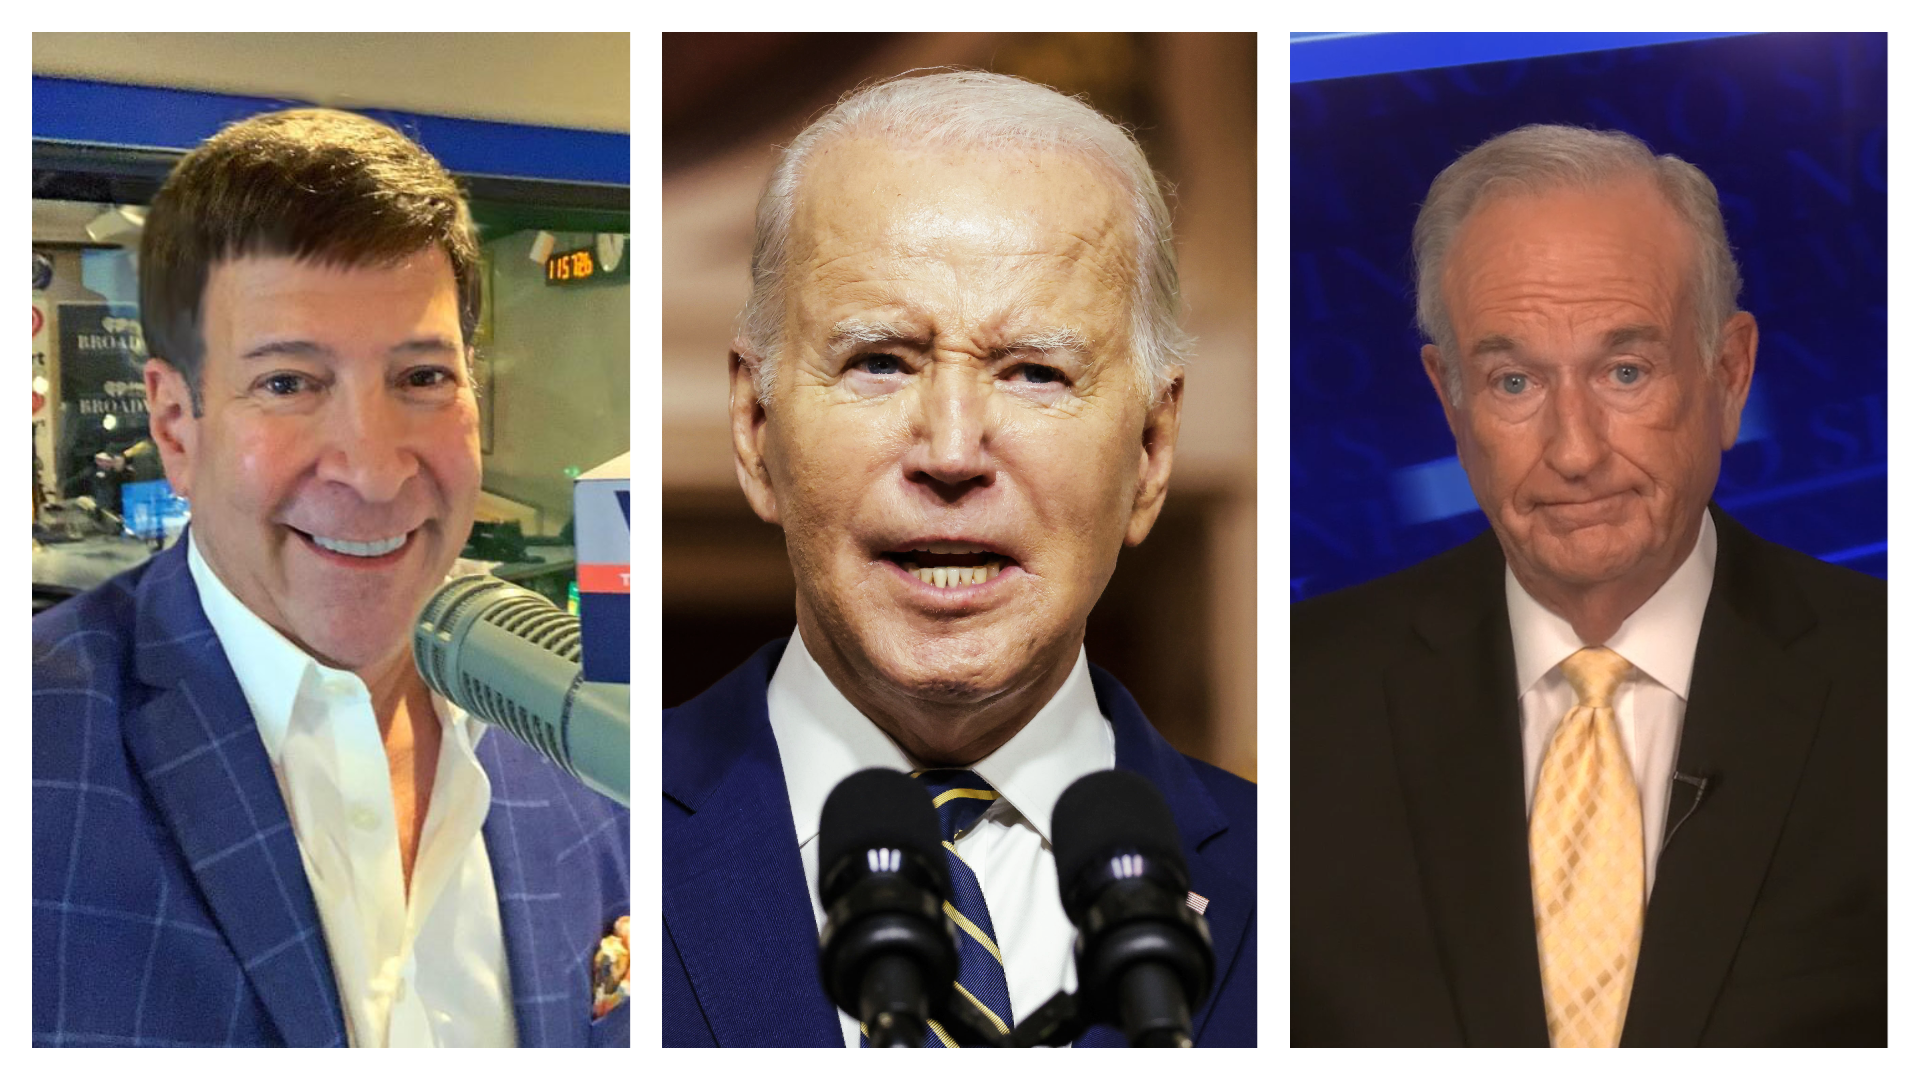 O'Reilly & Mark Simone on Joe Biden's Scandals and the Changing Media